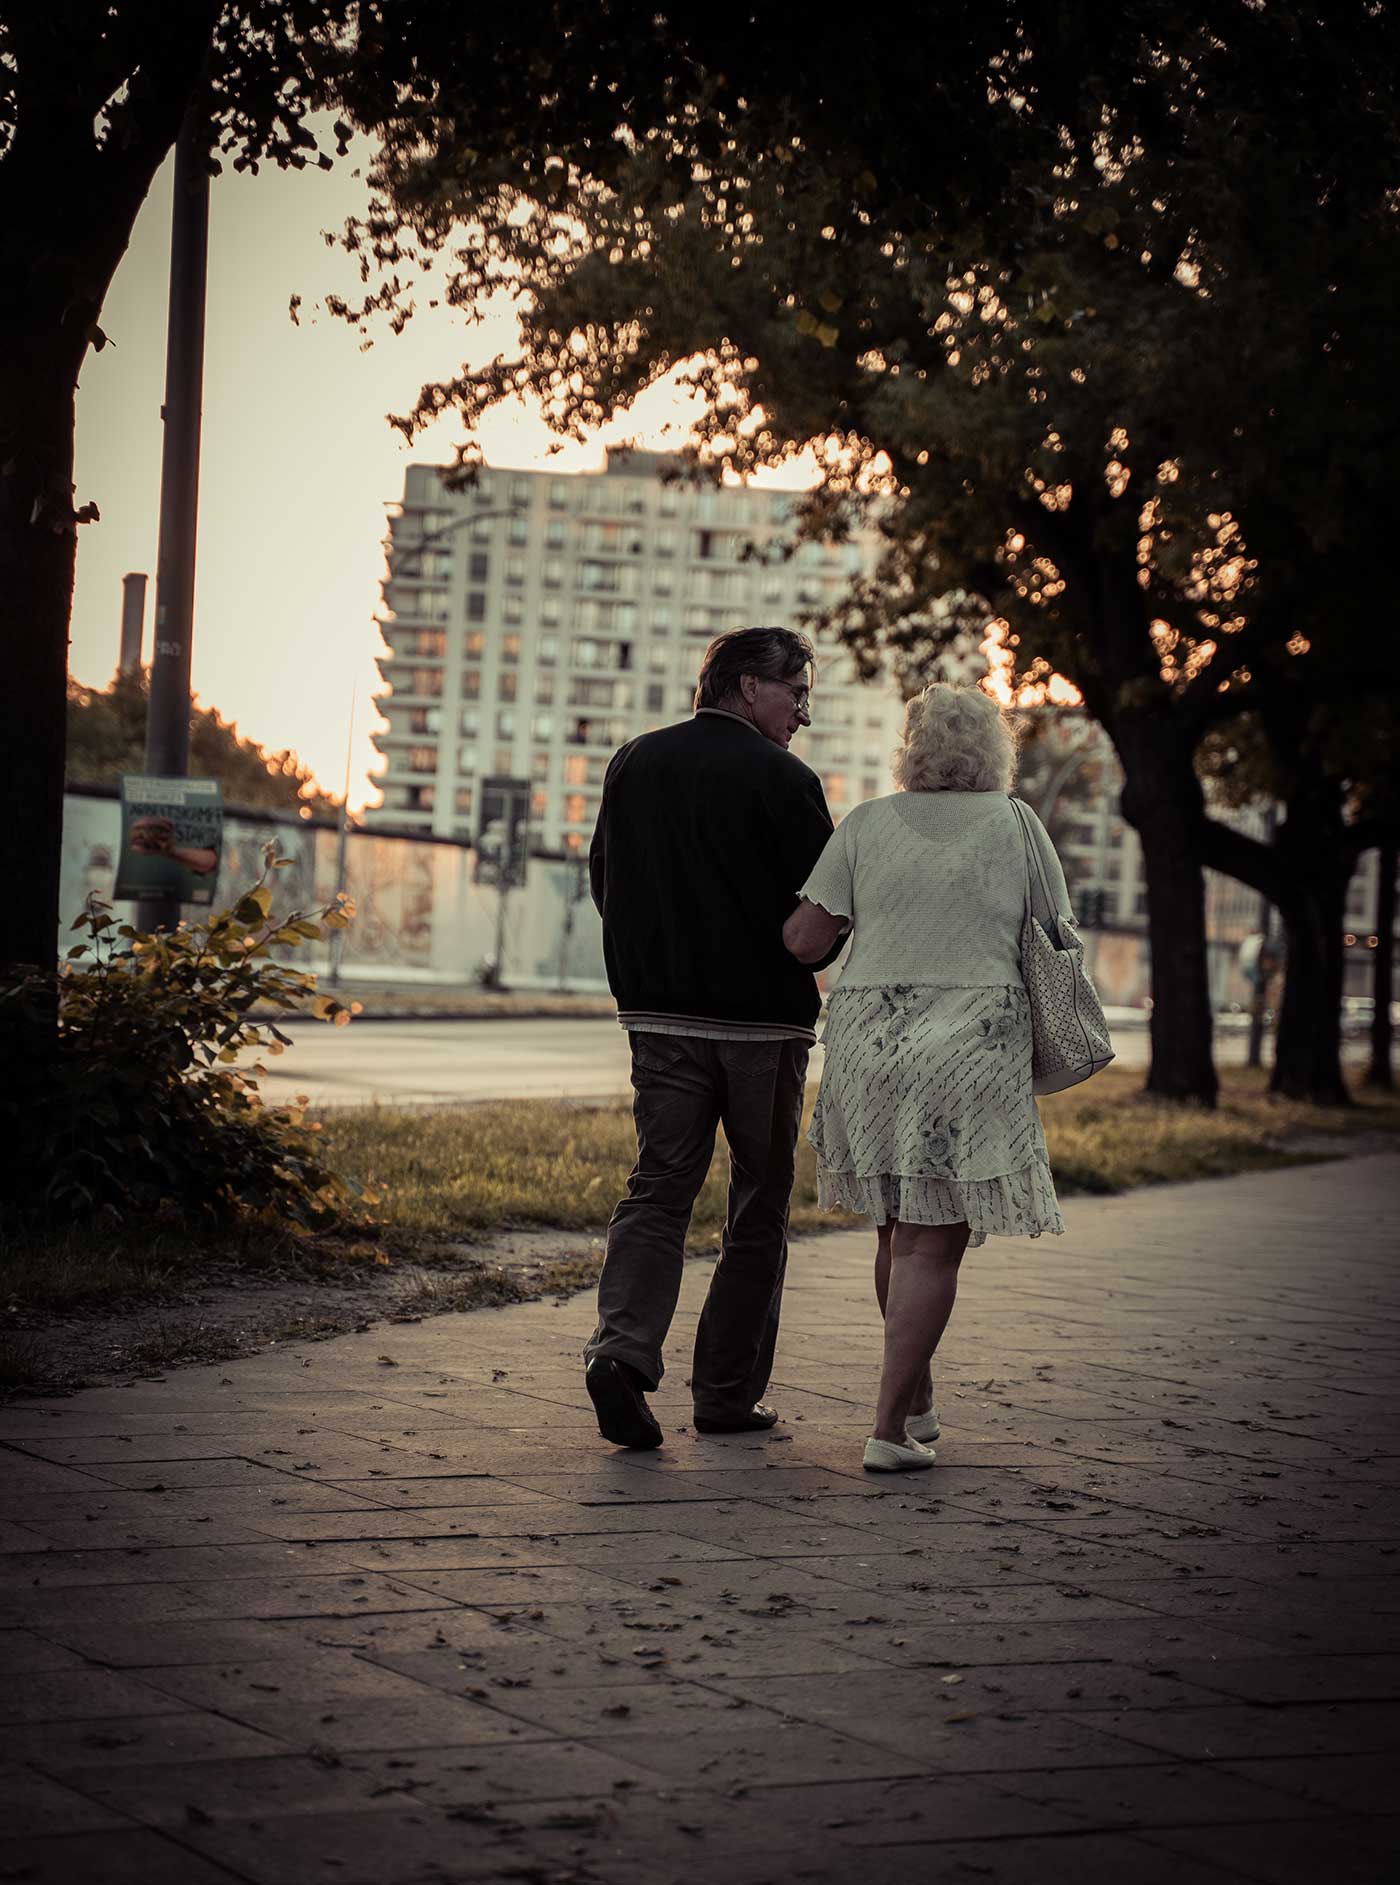 Older couple dating, walking along a river. Online dating at any age!